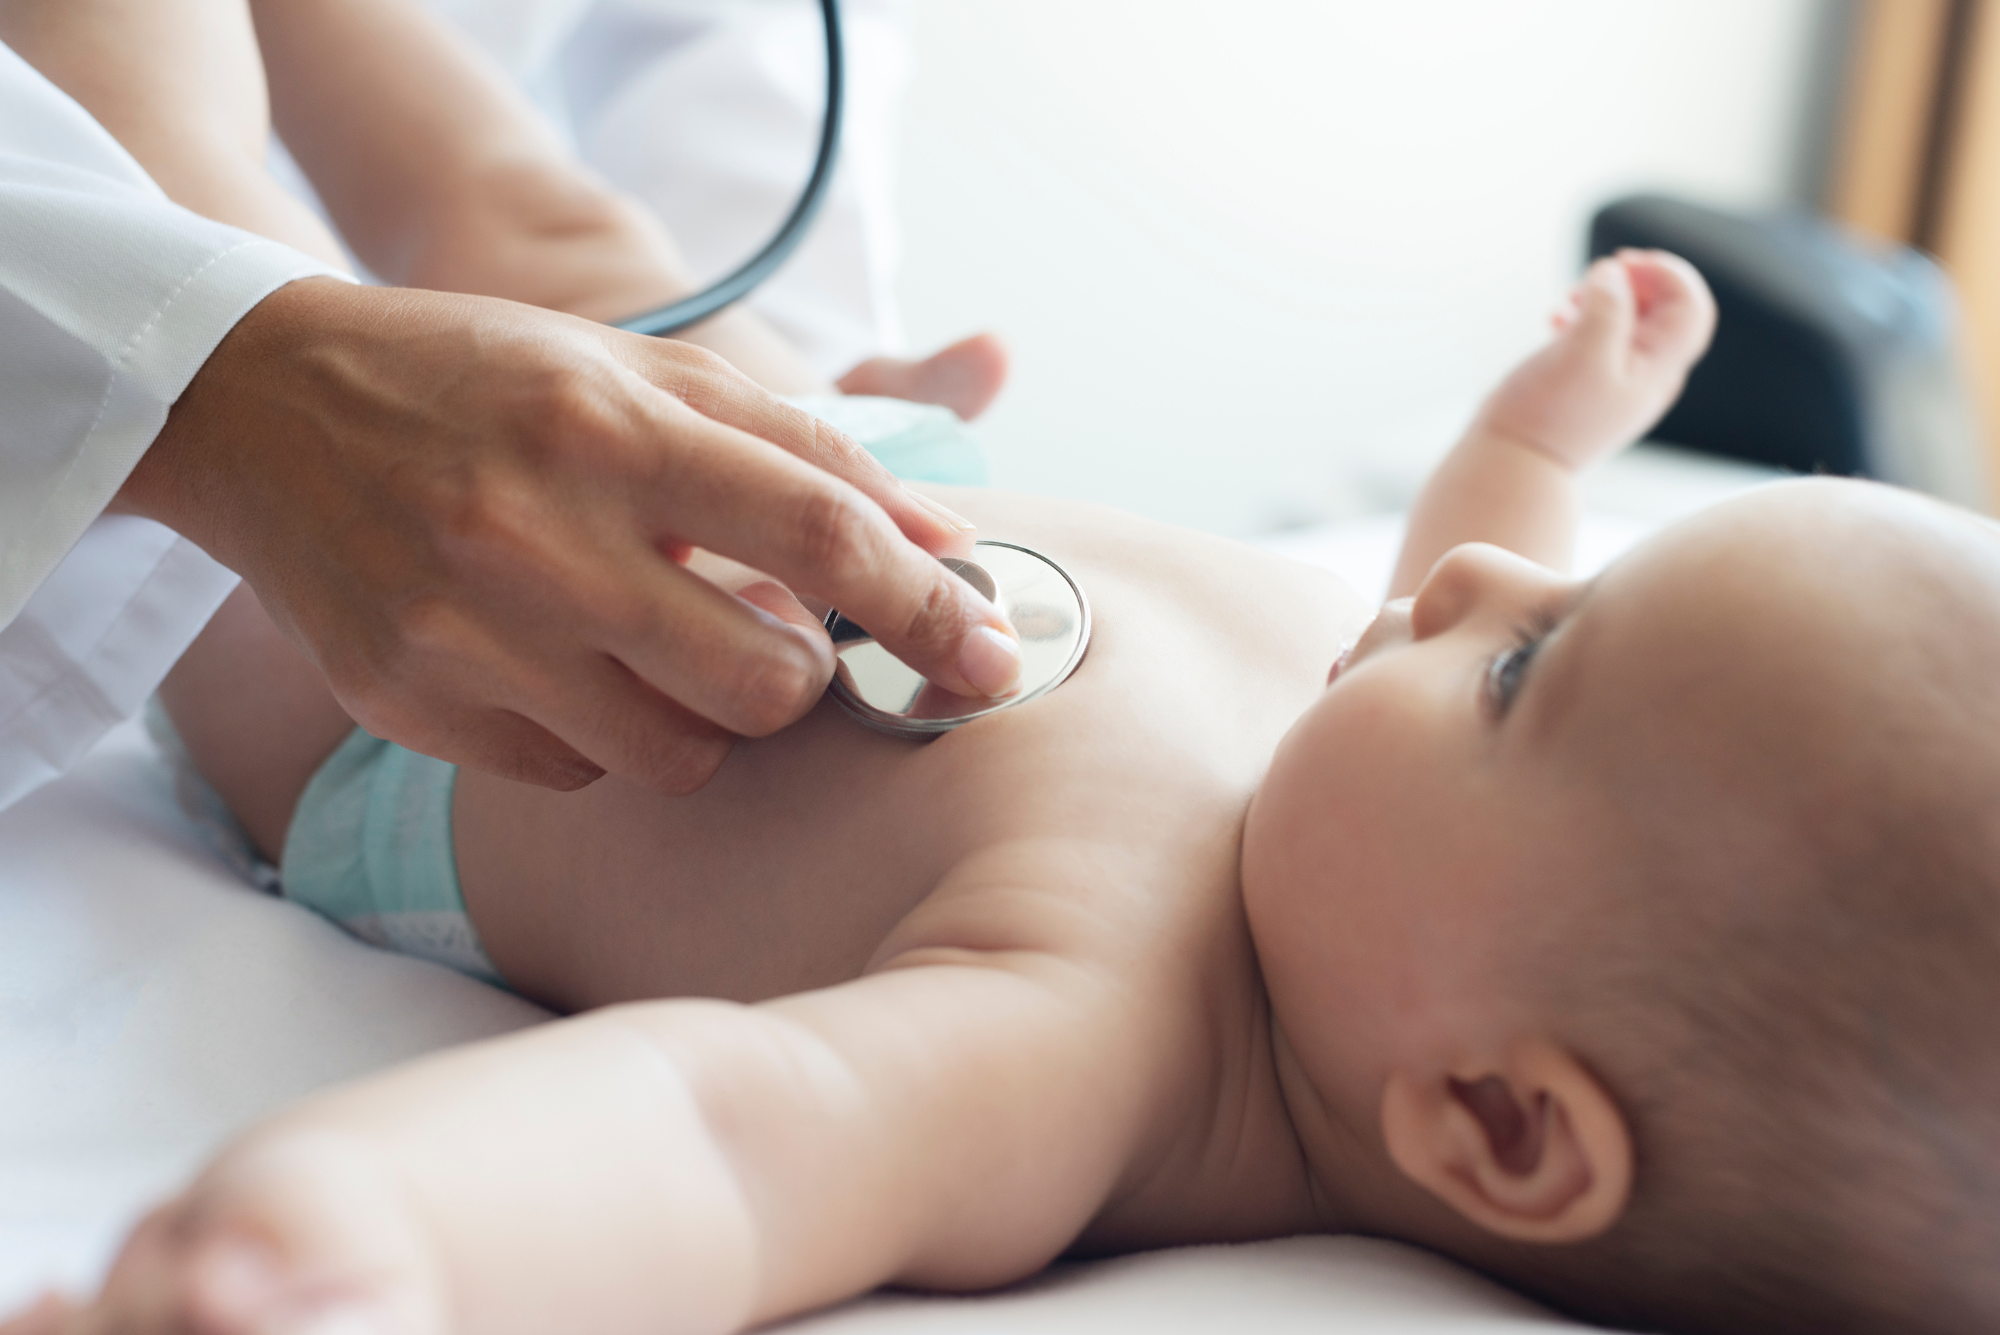 Baby Stethoscope: Health Officials Urge Precautions as Pediatric RSV Hospitalizations Increase